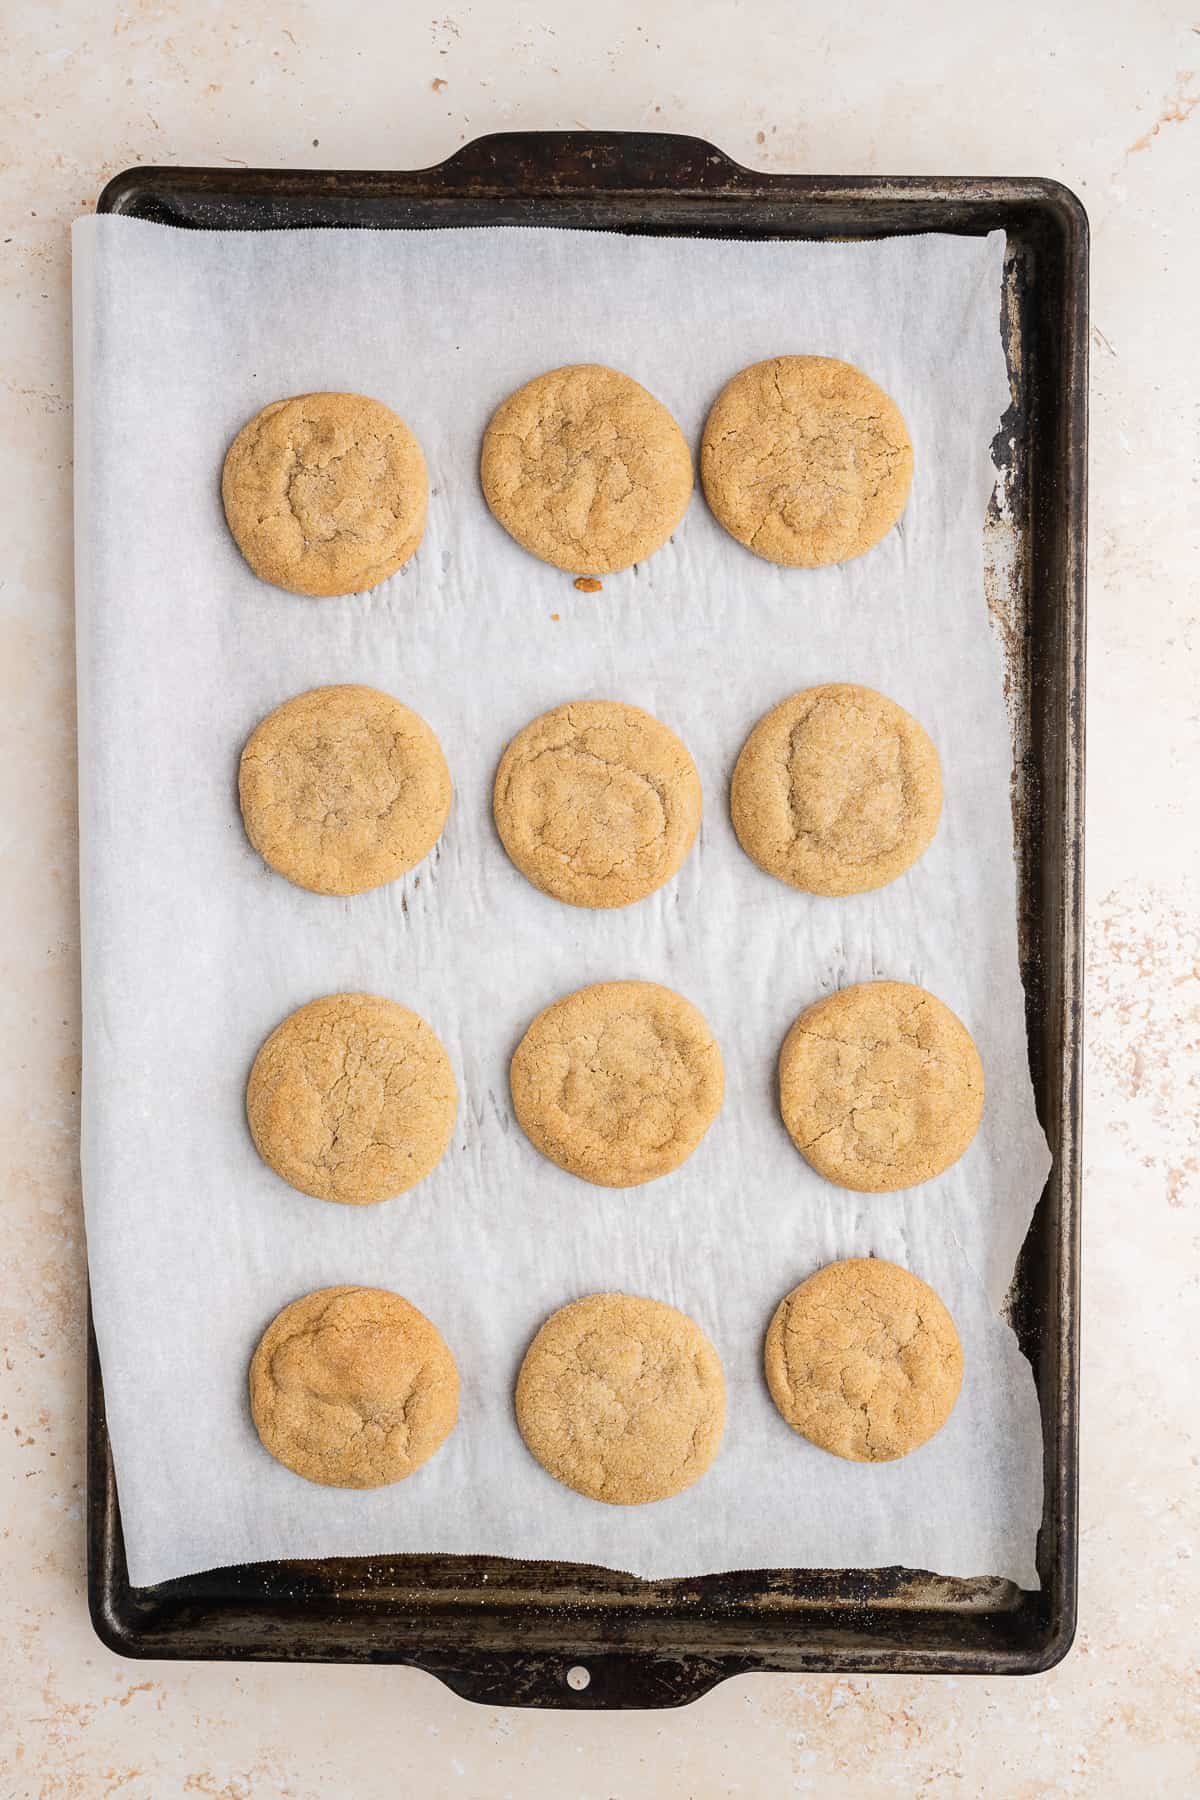 baked chai spiced brown sugar cookies on a baking sheet